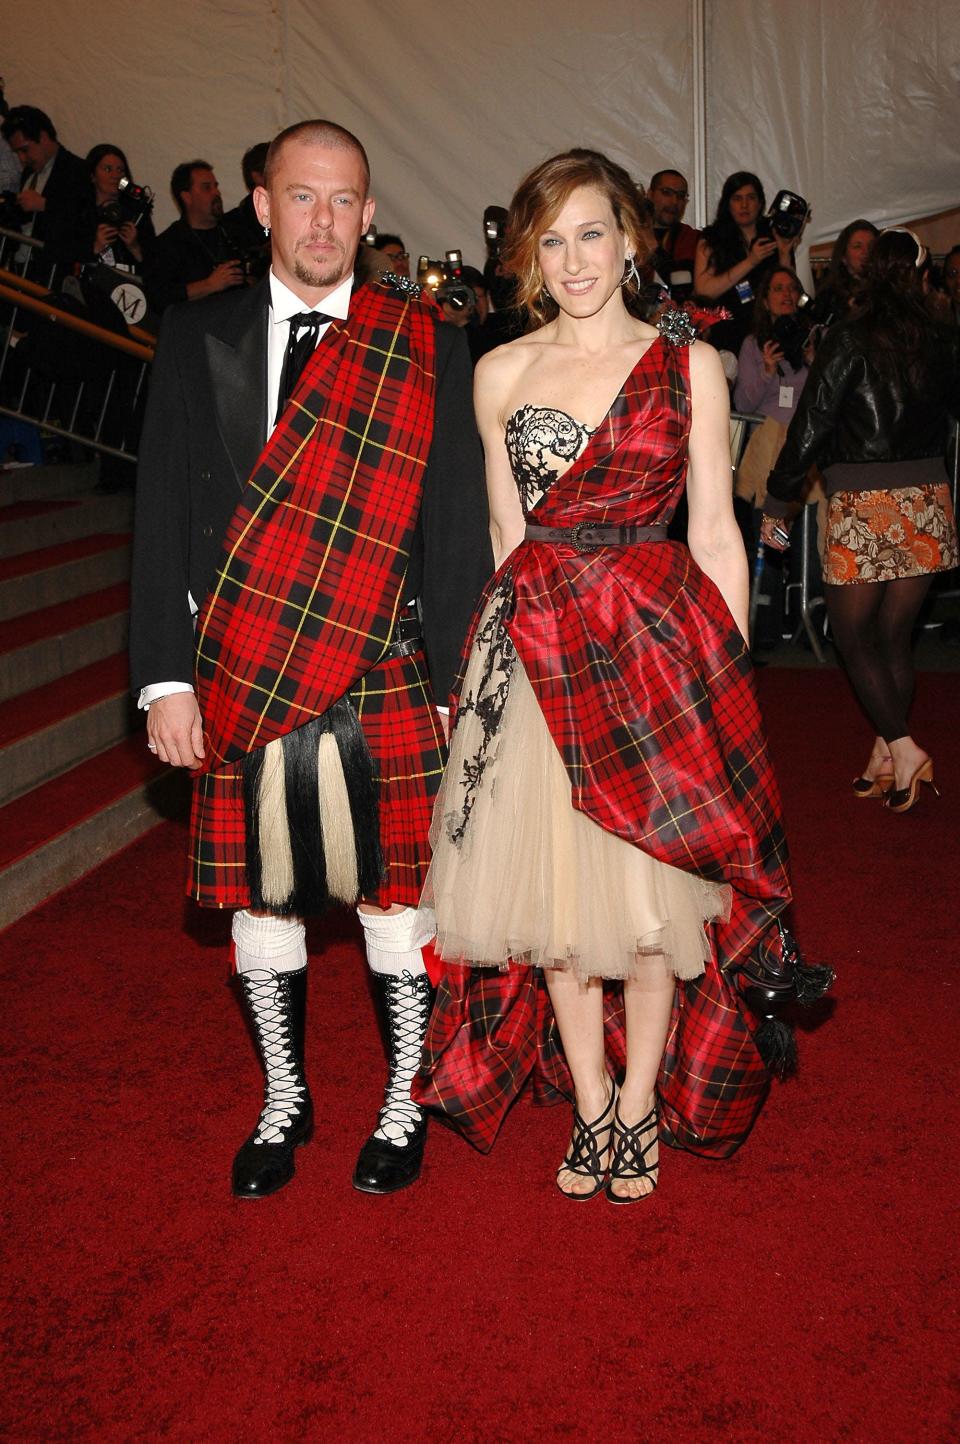 Alexander in a red plaid sash over his suit jacket and a red plaid kilt. He&#39;s standing side by side with Sarah Jessica in a nude tulle strapless dress with a lace bustier and red plaid sash forming one arm strap and being belted before flowing over the dress to the ground.